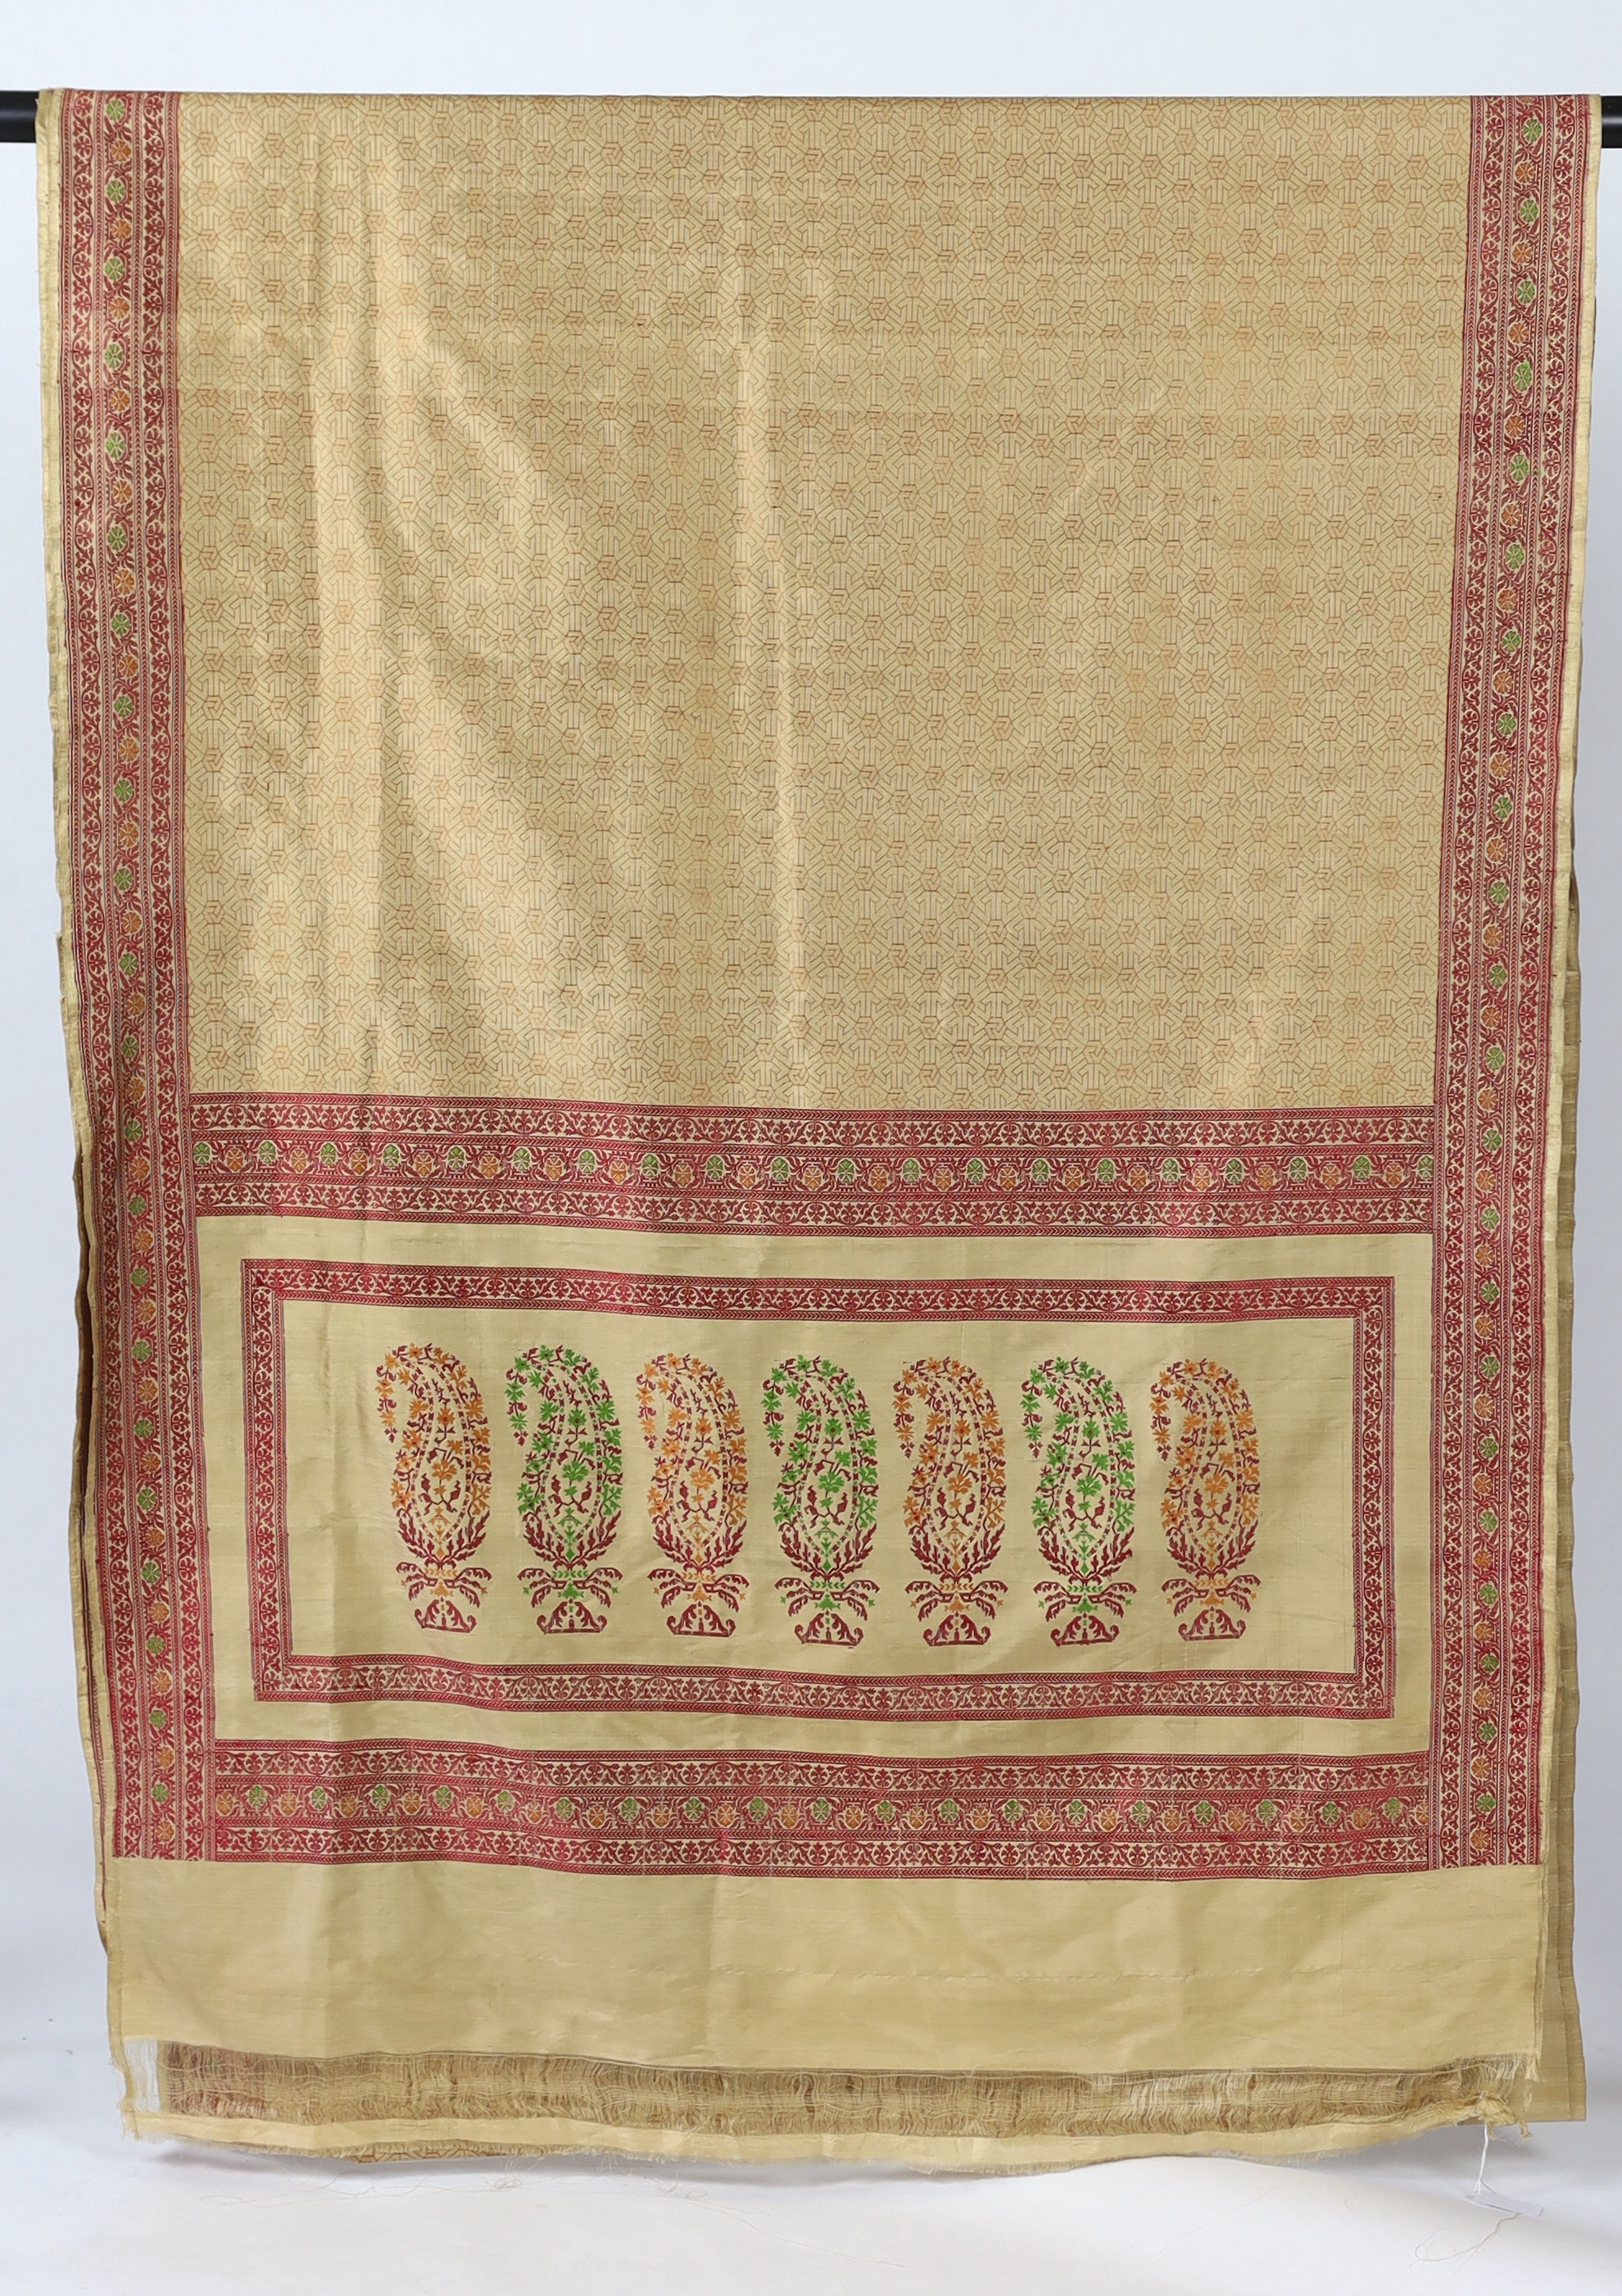 An Indian Varansi, 1980’s, hand woven silk sari by Mohammad Jafar Ali, woven in traditional style as a wedding sari, unused, 620cm long, 115cm wide, comes with provenance                                                  